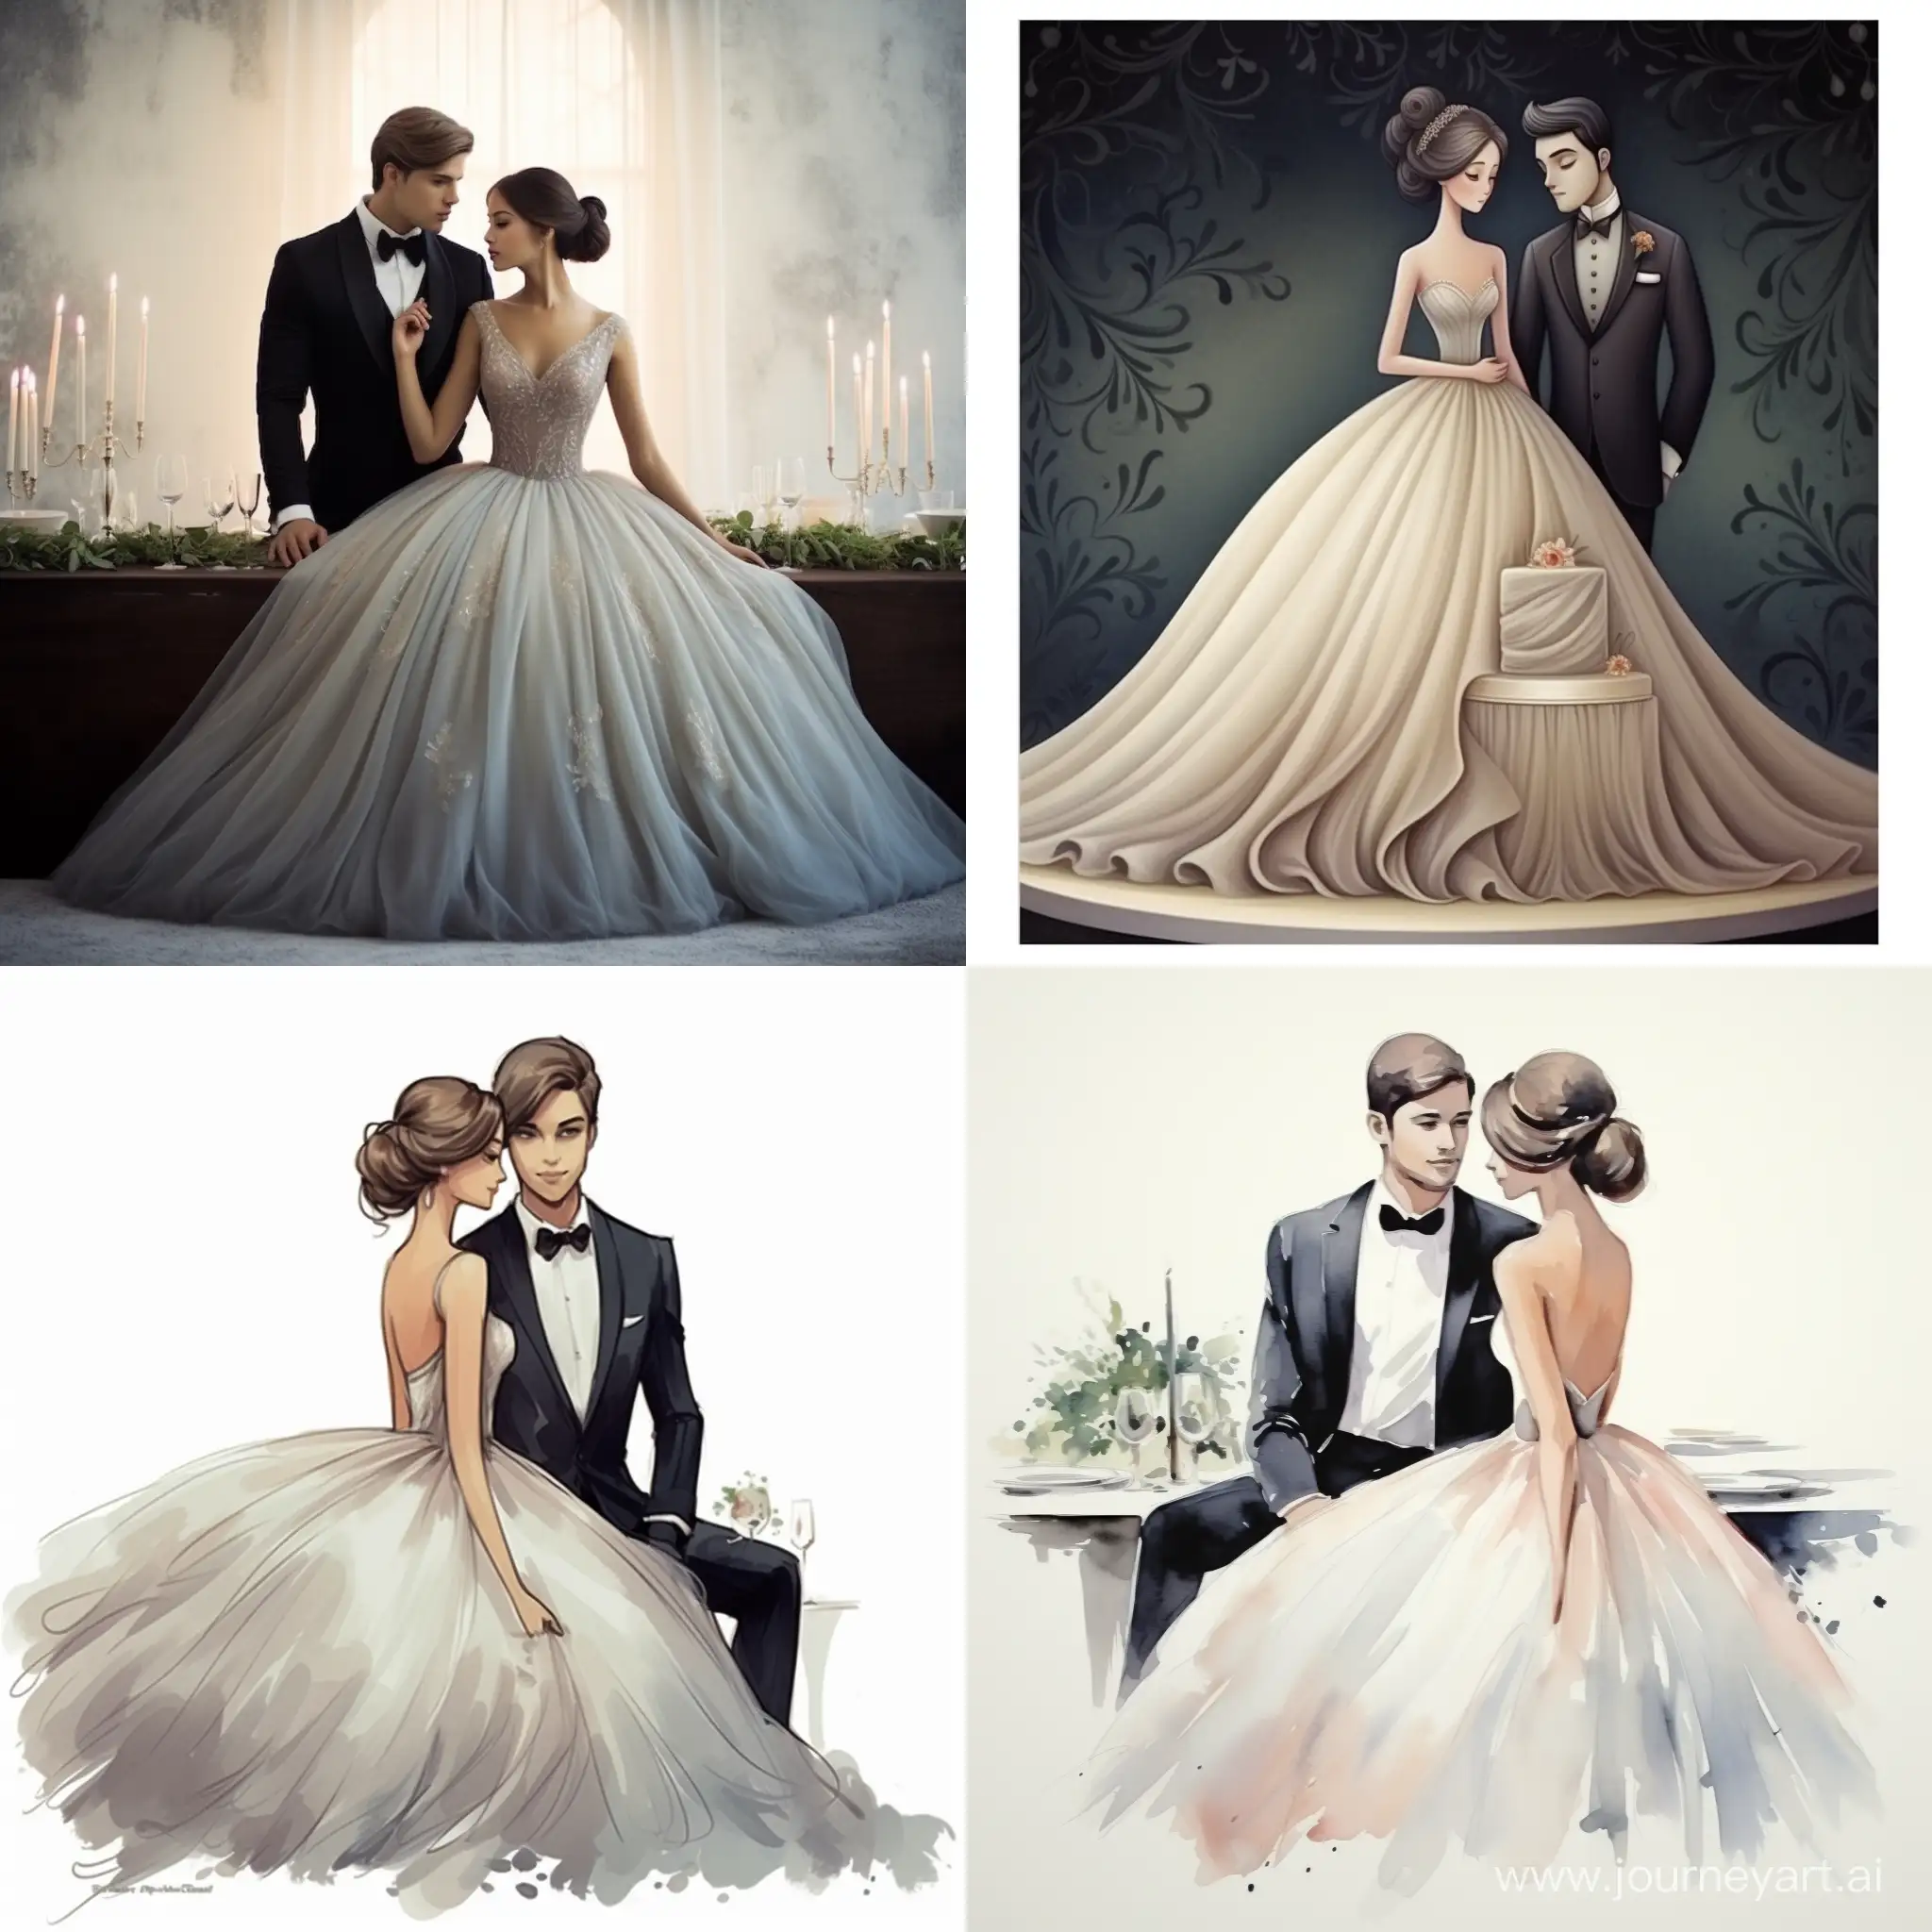 Elegant-Wedding-Scene-Bride-in-LowCut-Dress-and-Groom-at-the-Wedding-Table